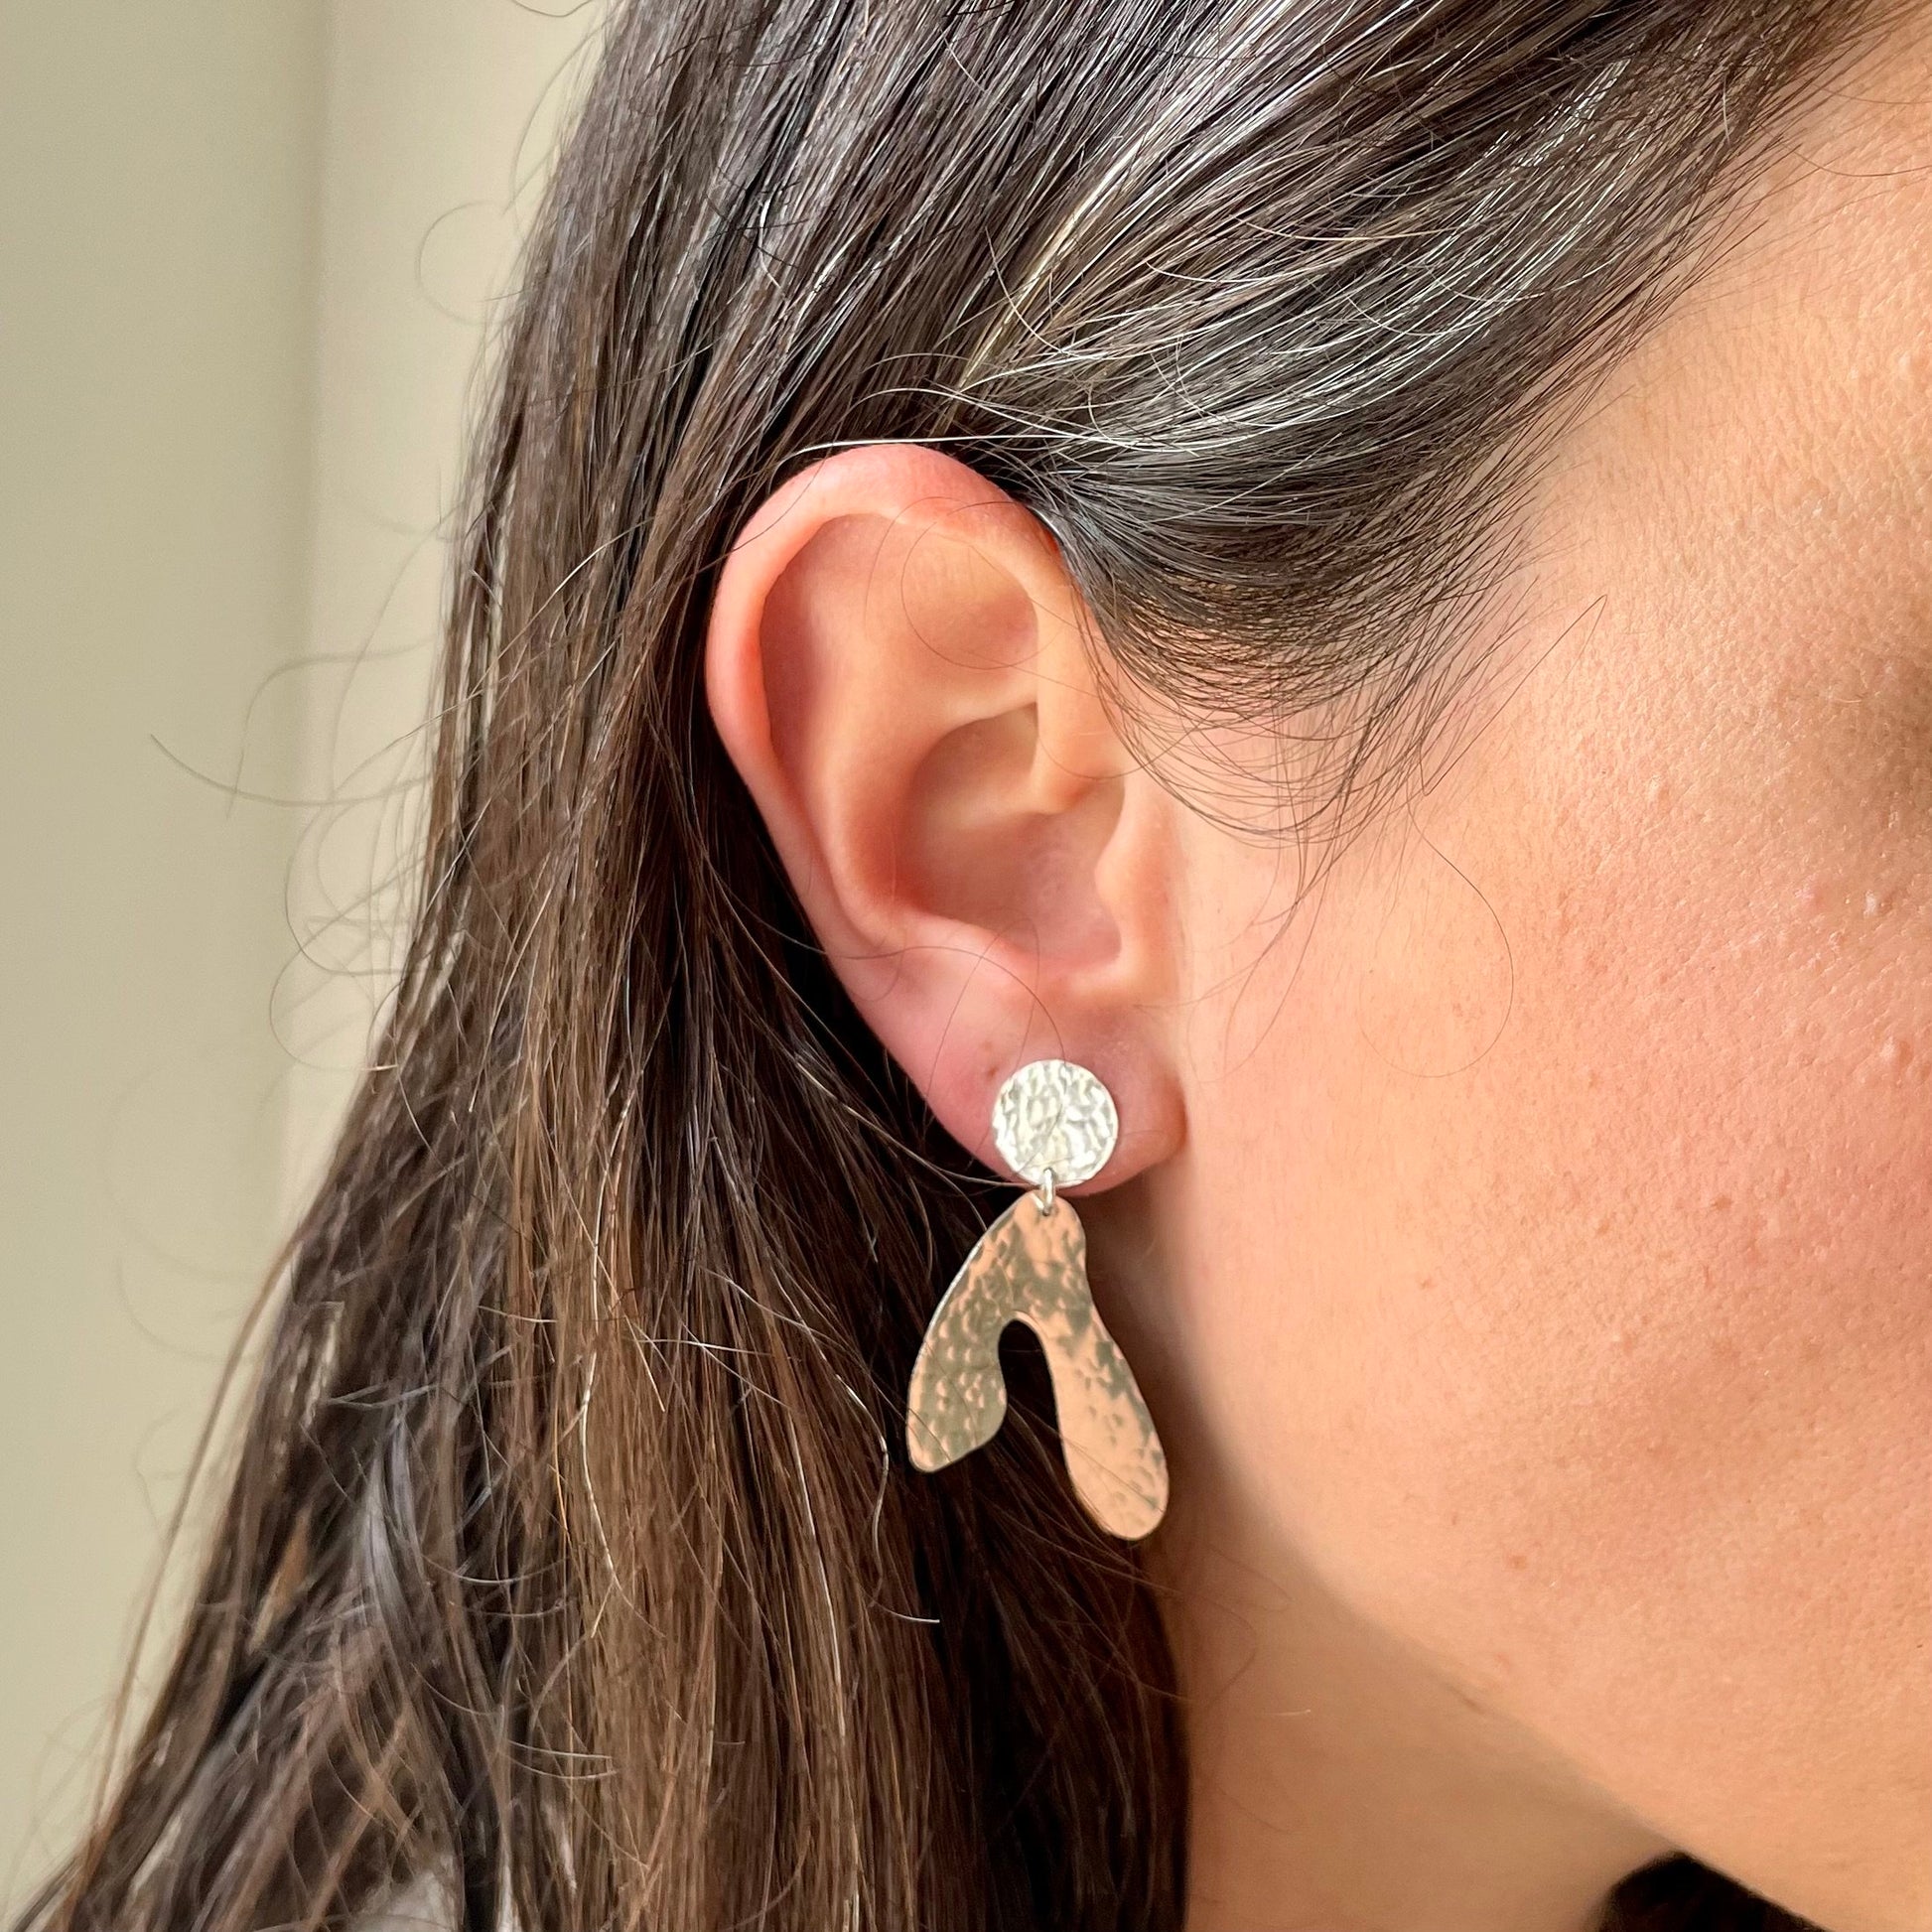 Sycamore Earrings: sycamore seed shaped earrings handmade in recycled silver, worn by a model.